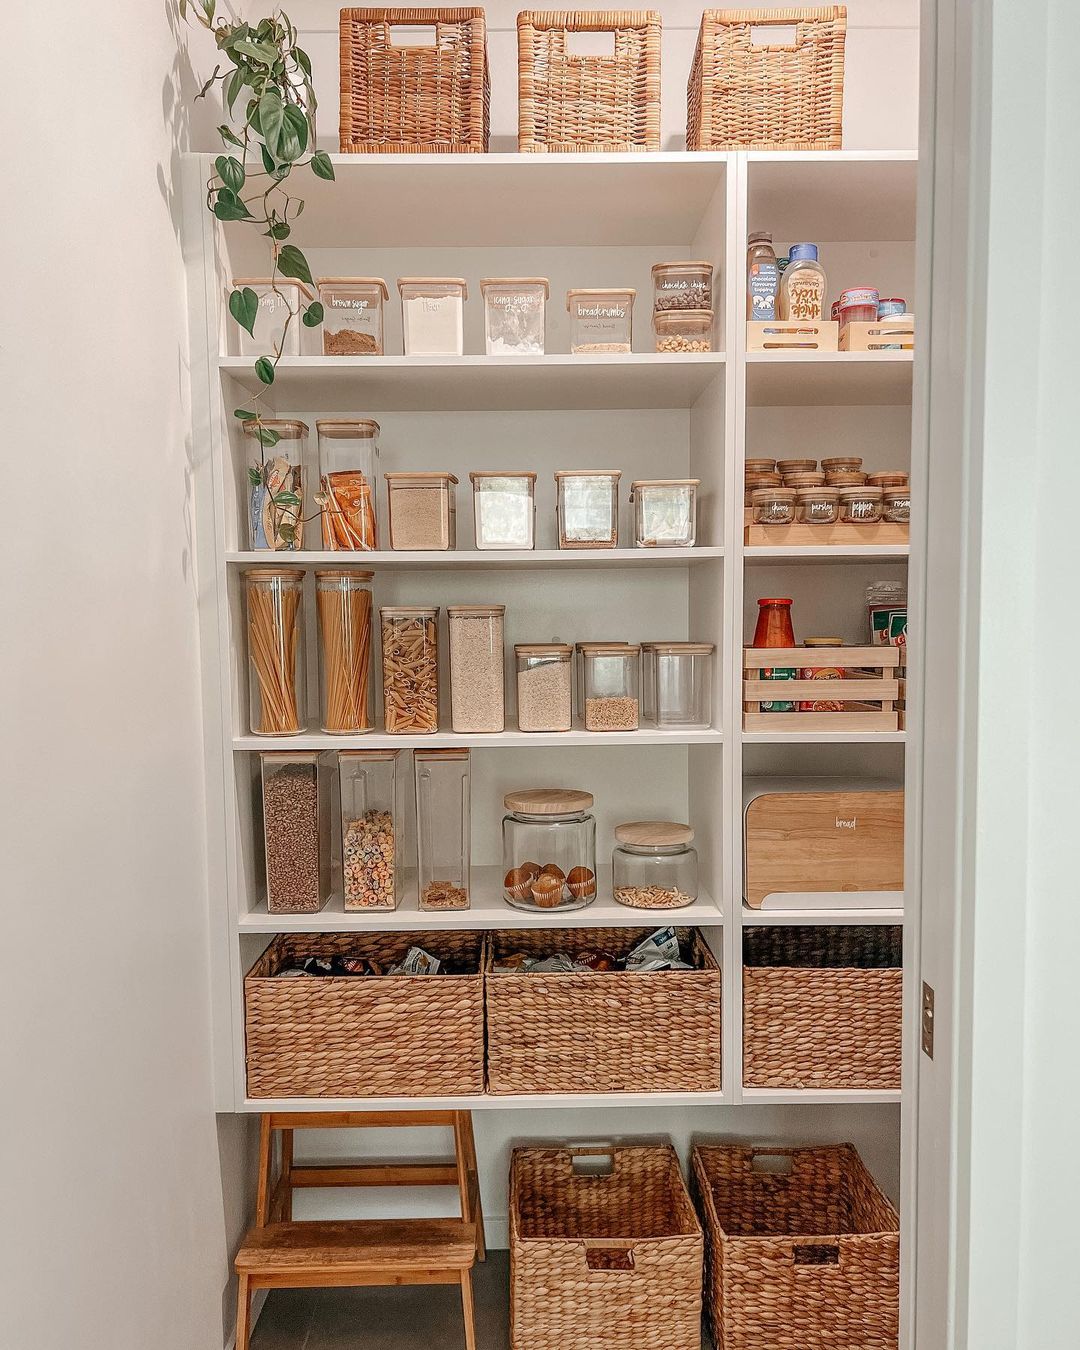 Looking to organize a small pantry efficiently? Consider utilizing white pantry with wicker baskets for storage.